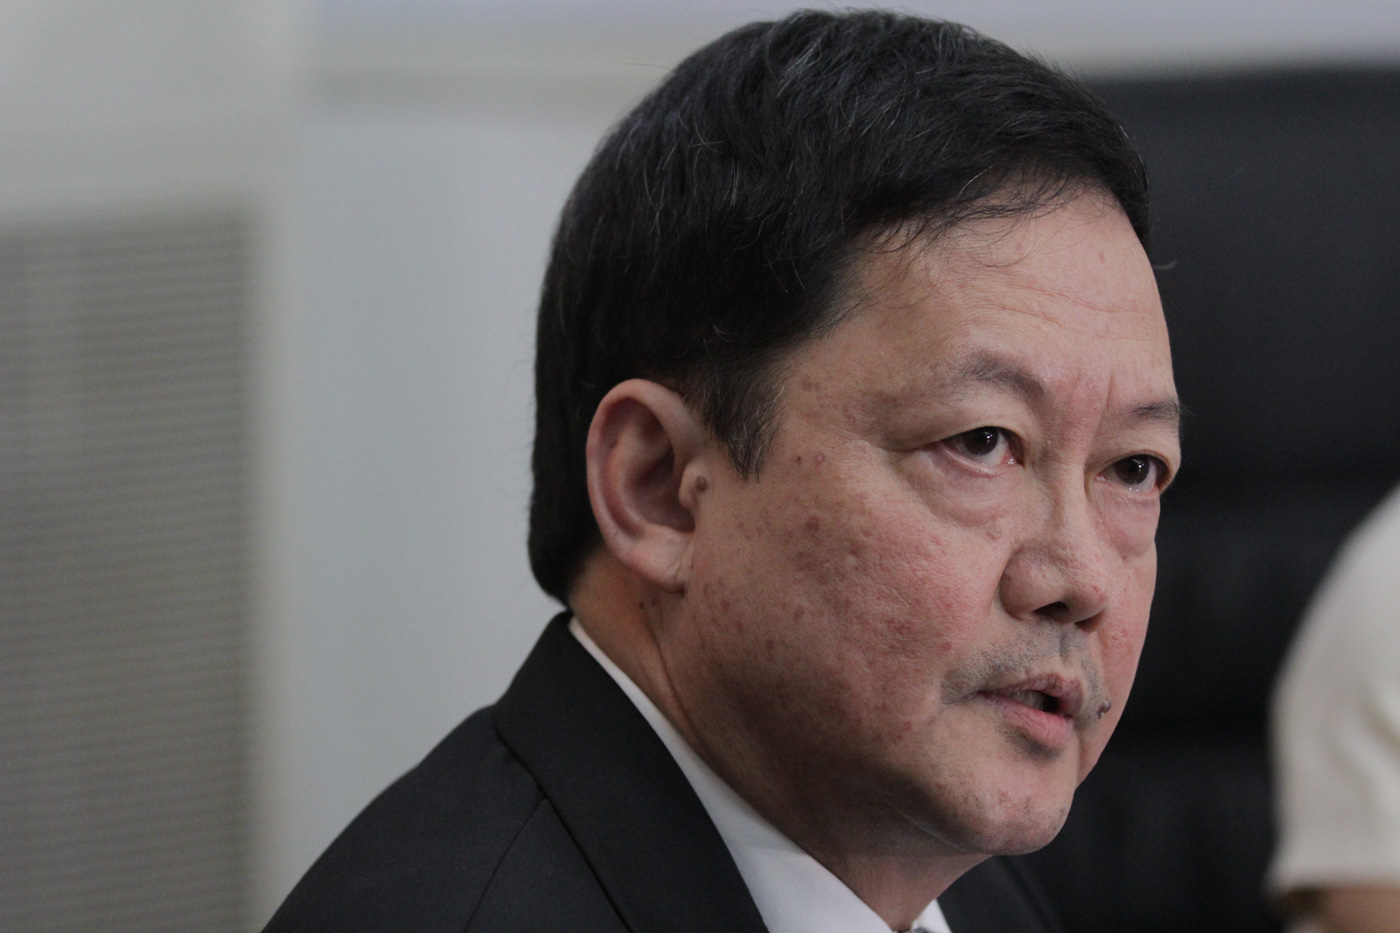 JOINT INQUIRY. Justice Secretary Menardo Guevarra proposes a joint inquiry with China to investigate the sinking of a Philippine boat in Recto Bank. Photo by Ben Nabong/Rappler  